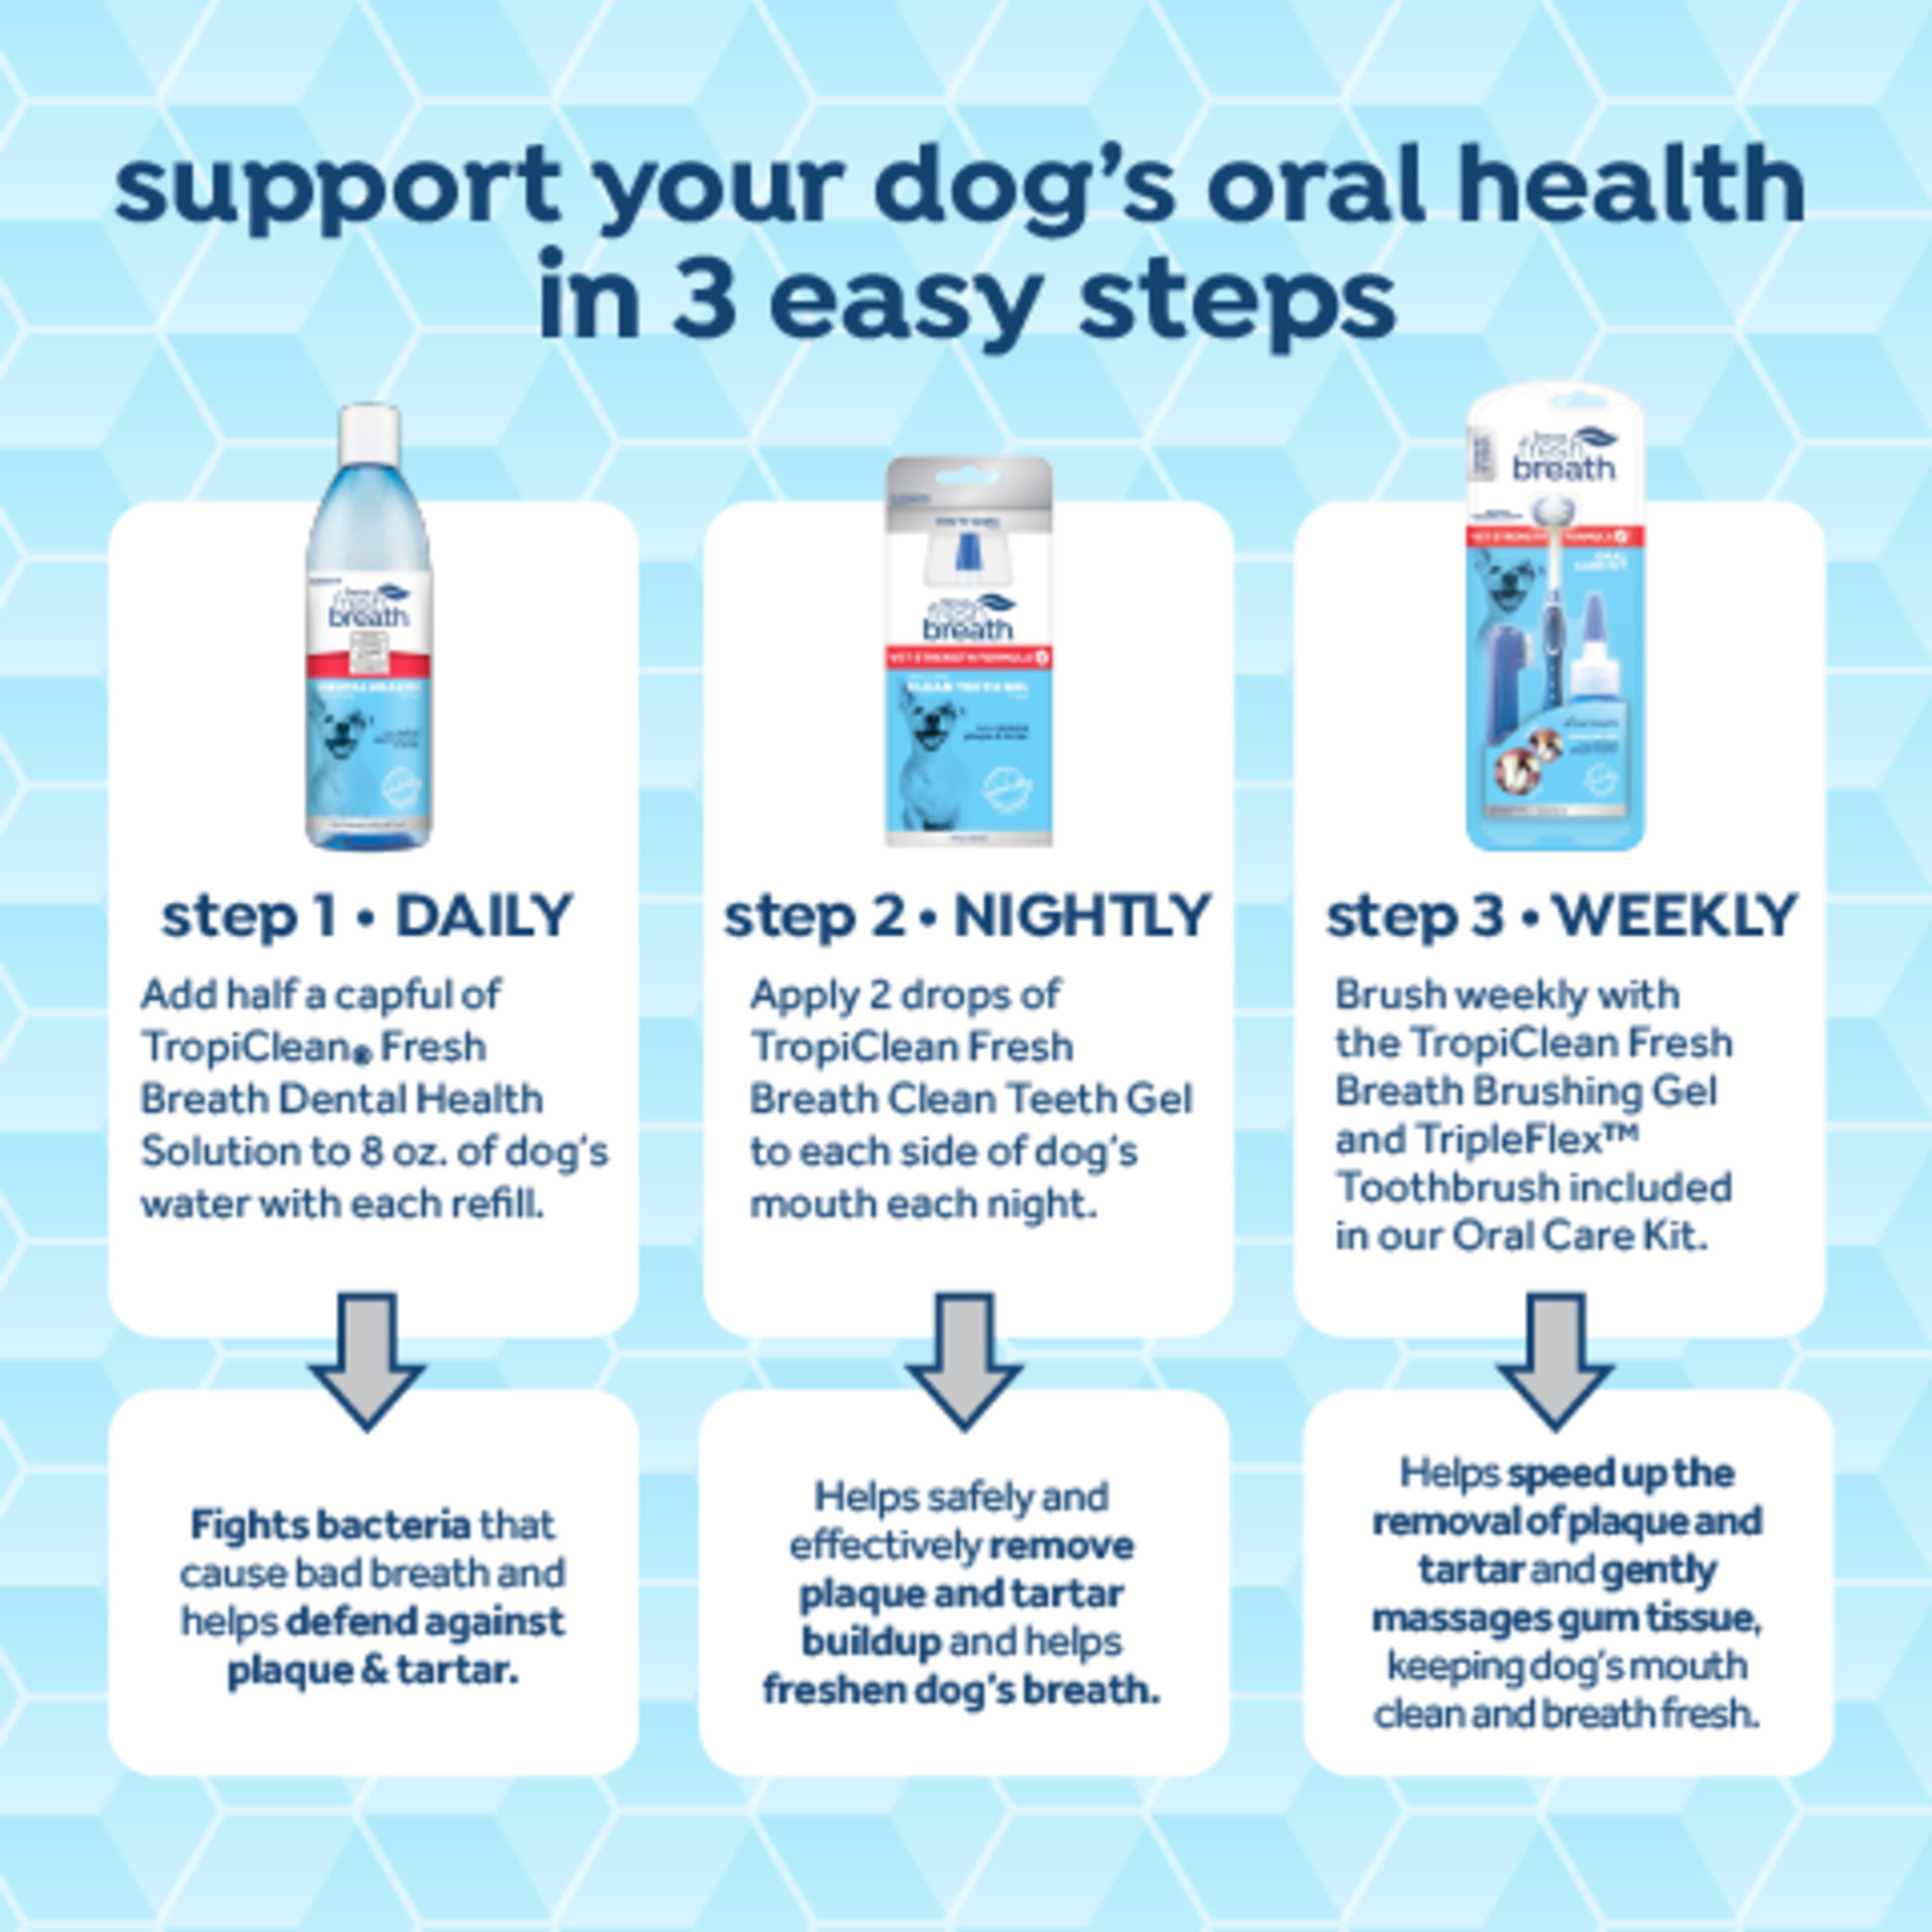 Dental Health Solution Plus Hip & Joint or Dogs